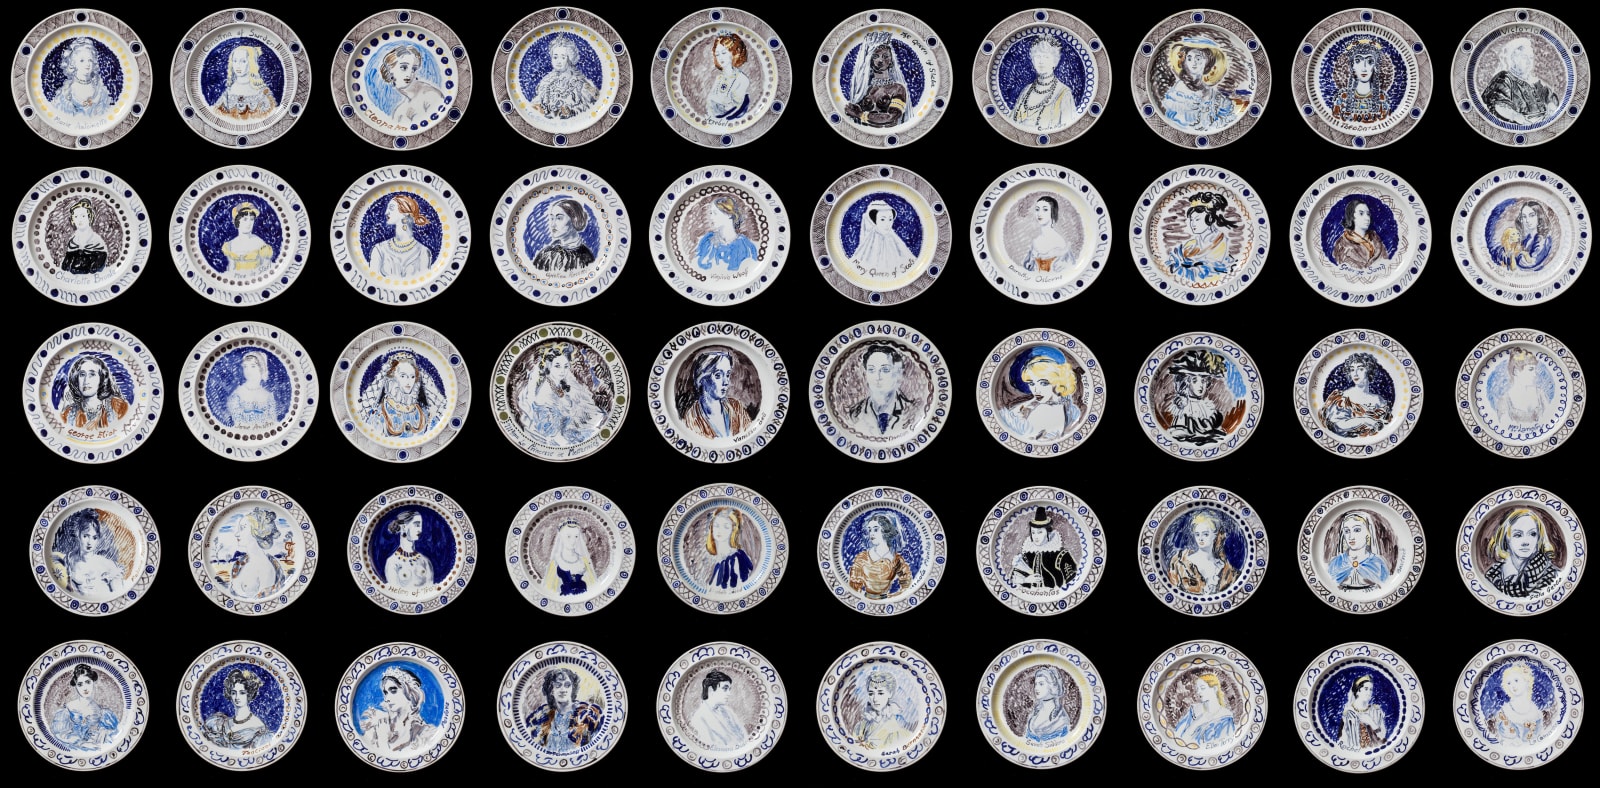 Vanessa Bell and Duncan Grant, The Famous Women Dinner Service, 1932-34 c.